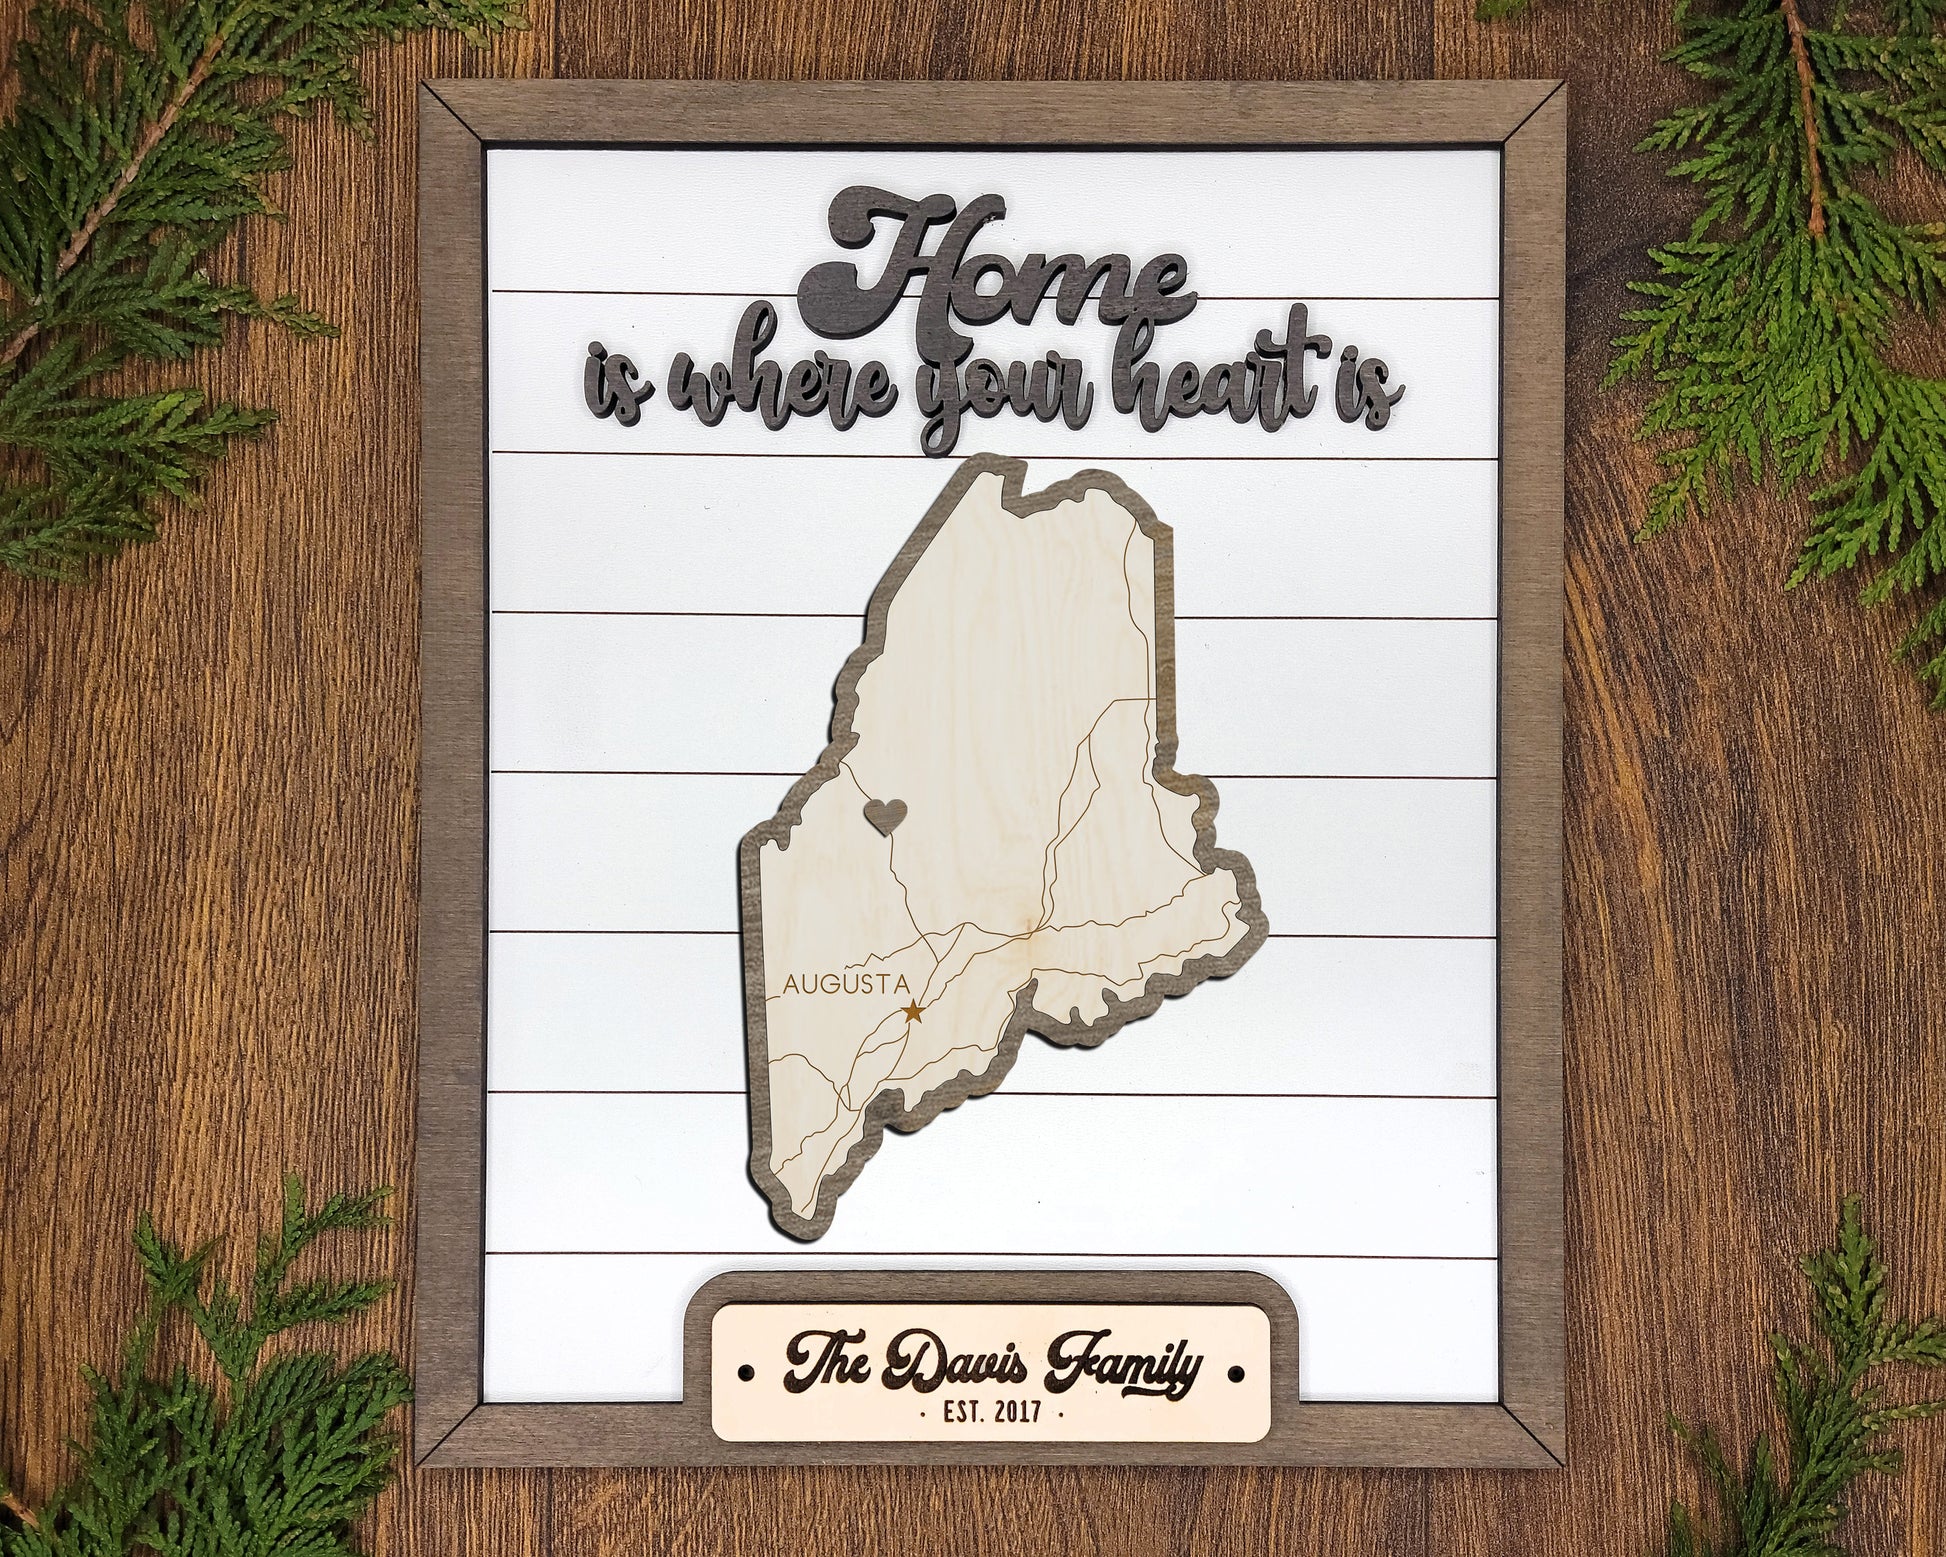 The Maine State Frame - 13 text options, 12 backgrounds, 25 icons Included - Make over 7,500 designs - Glowforge & Lightburn Tested